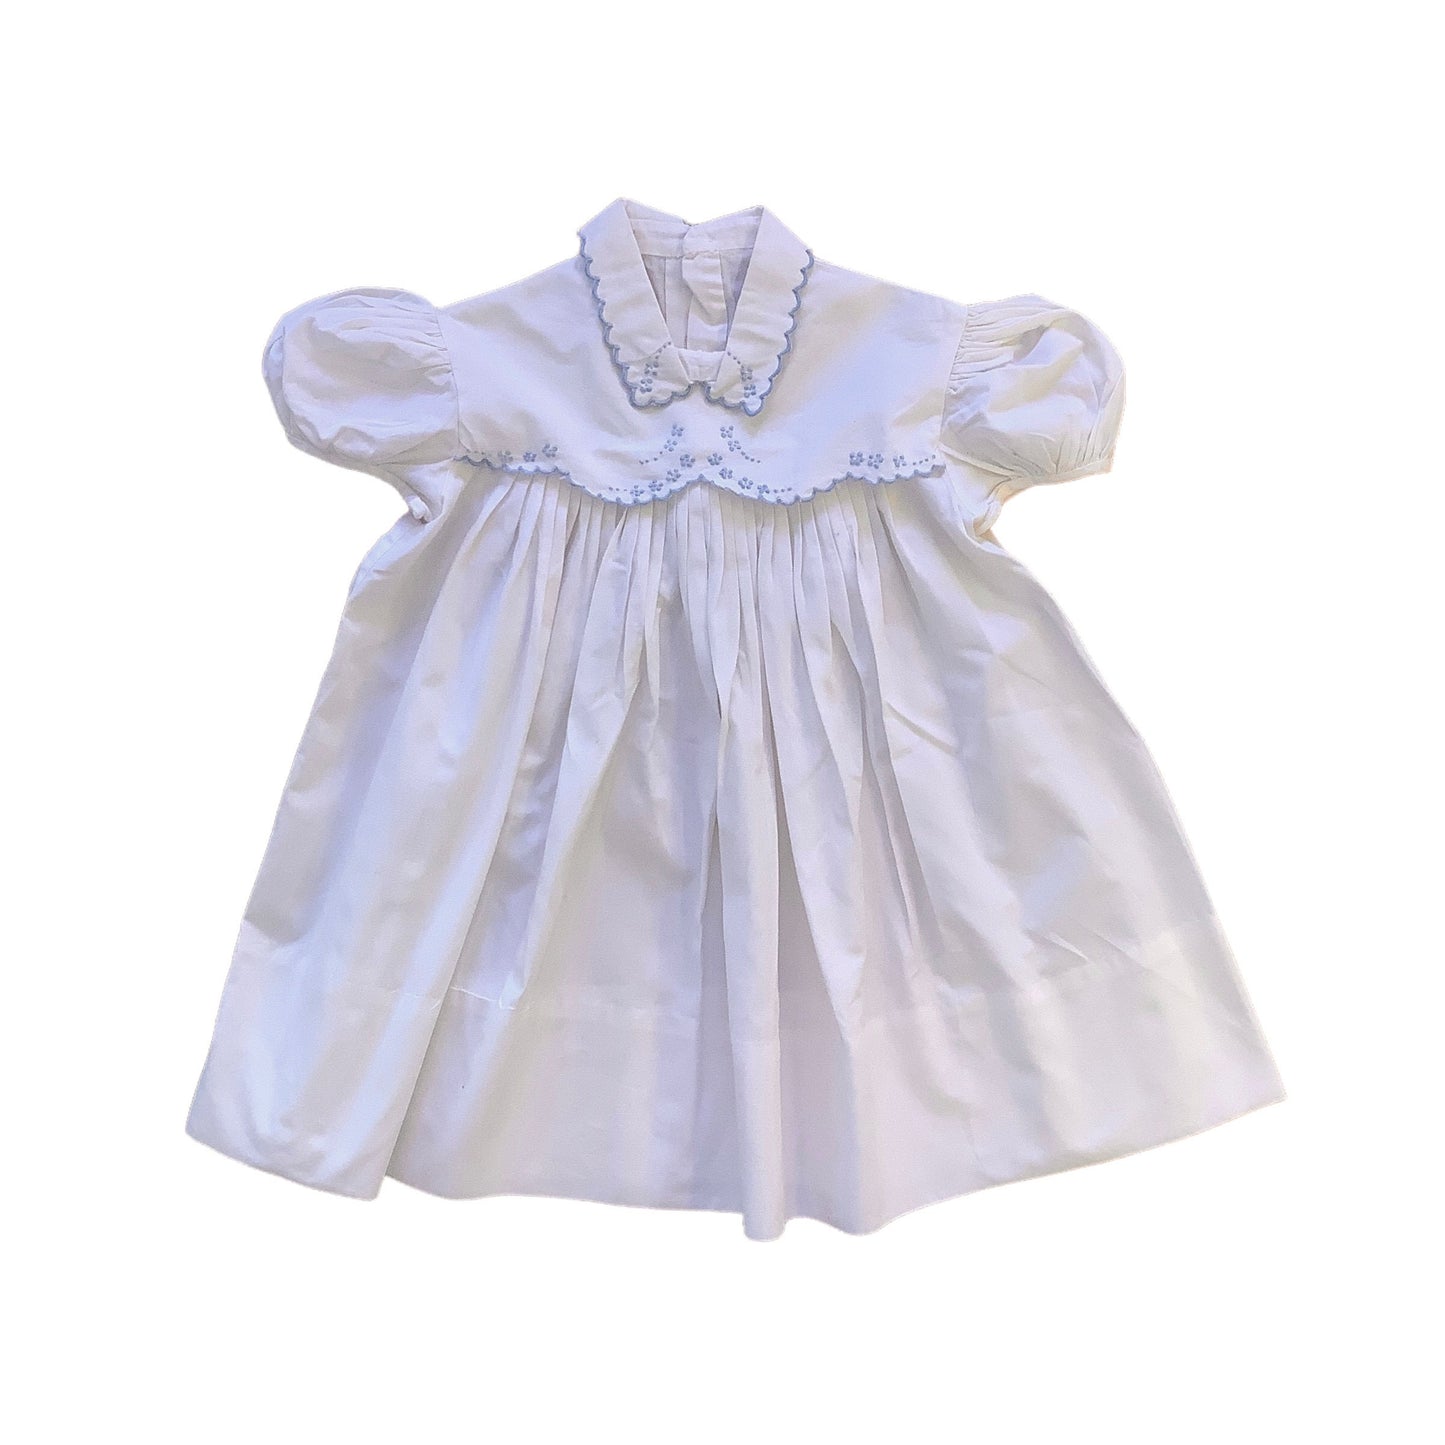 1960s  Delicately Embroidered White Cotton  Dress / 9-12 Months